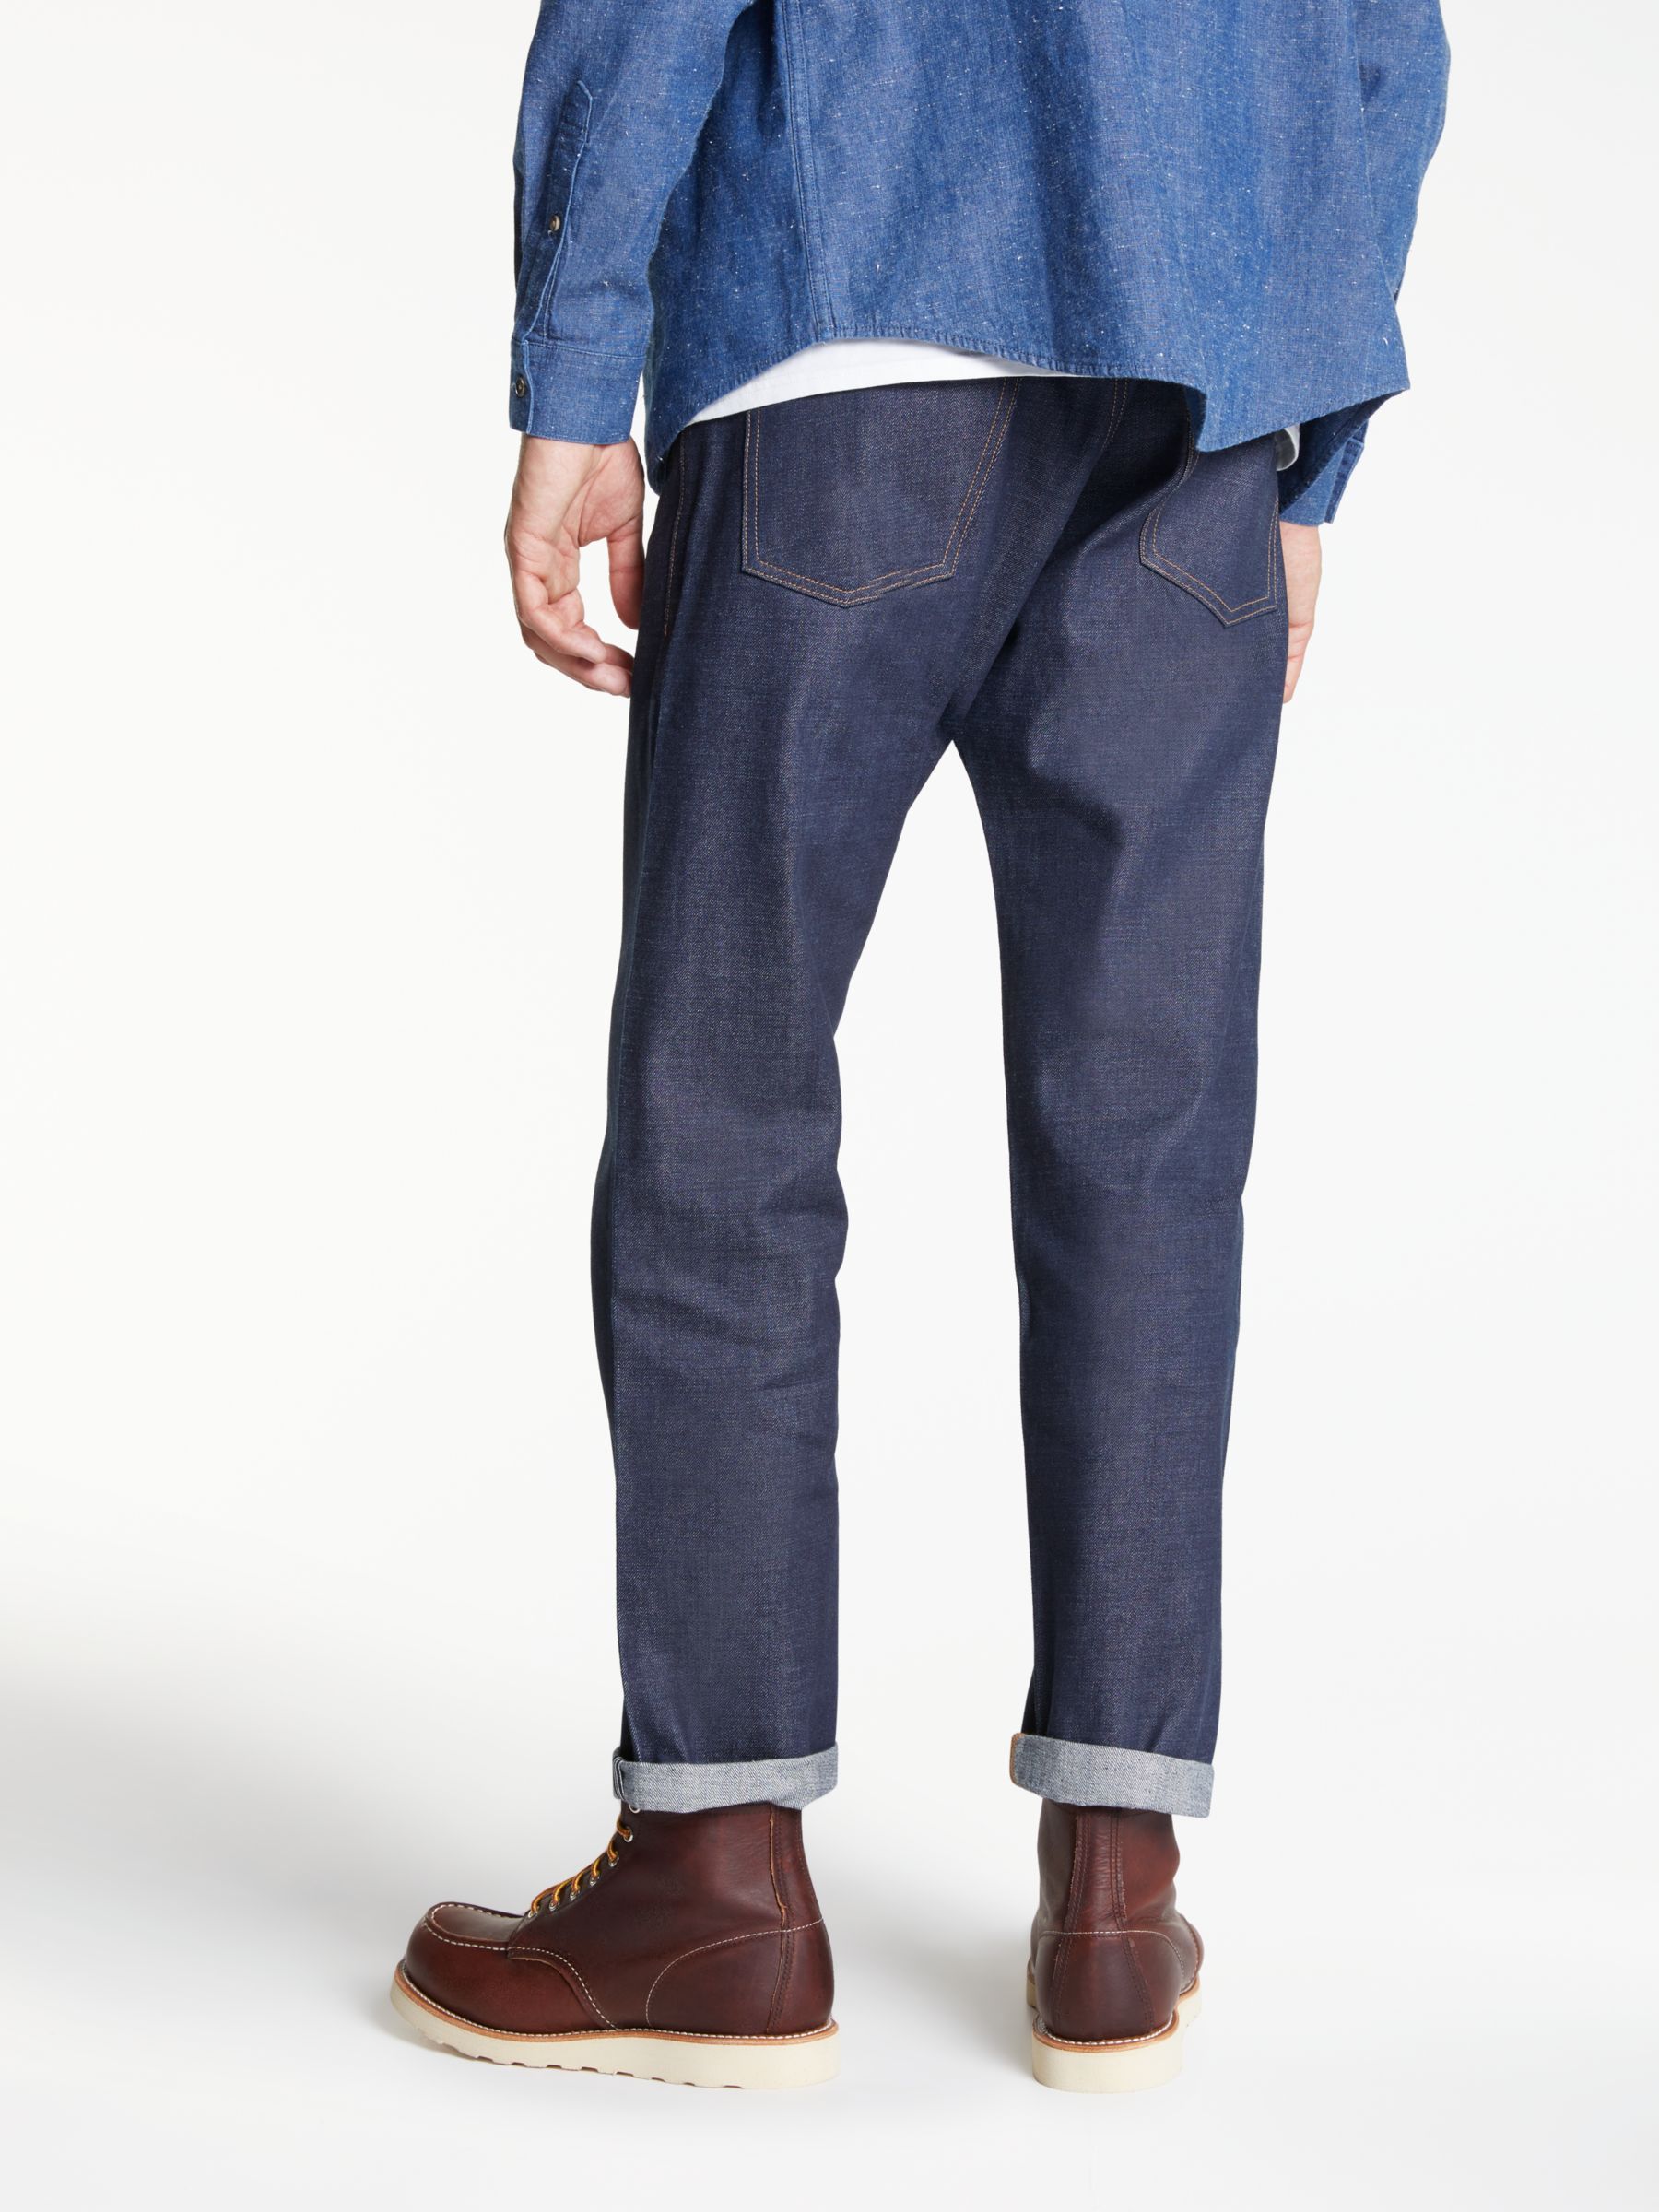 Levi's Made & Crafted Rail Straight Non-Stretch Selvedge Jeans, Dark at ...